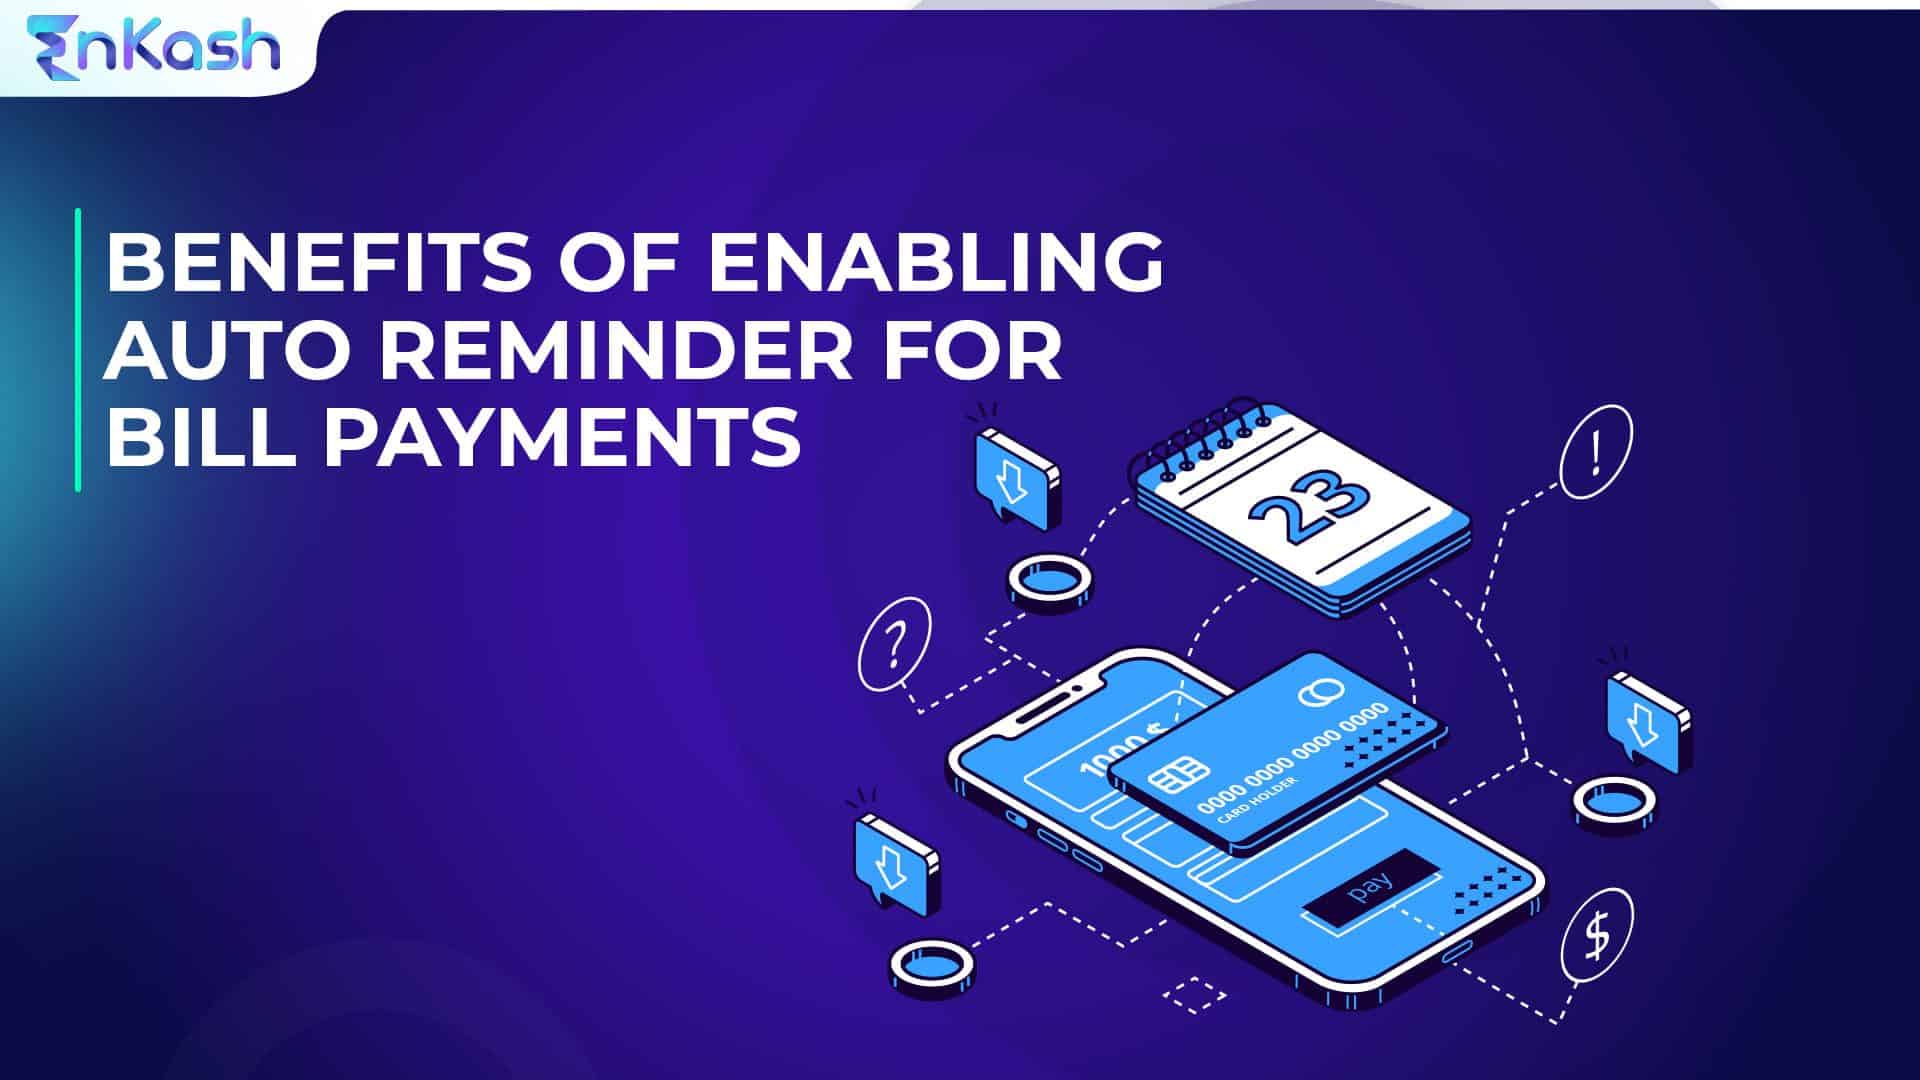 Auto Reminder for Bill Payments